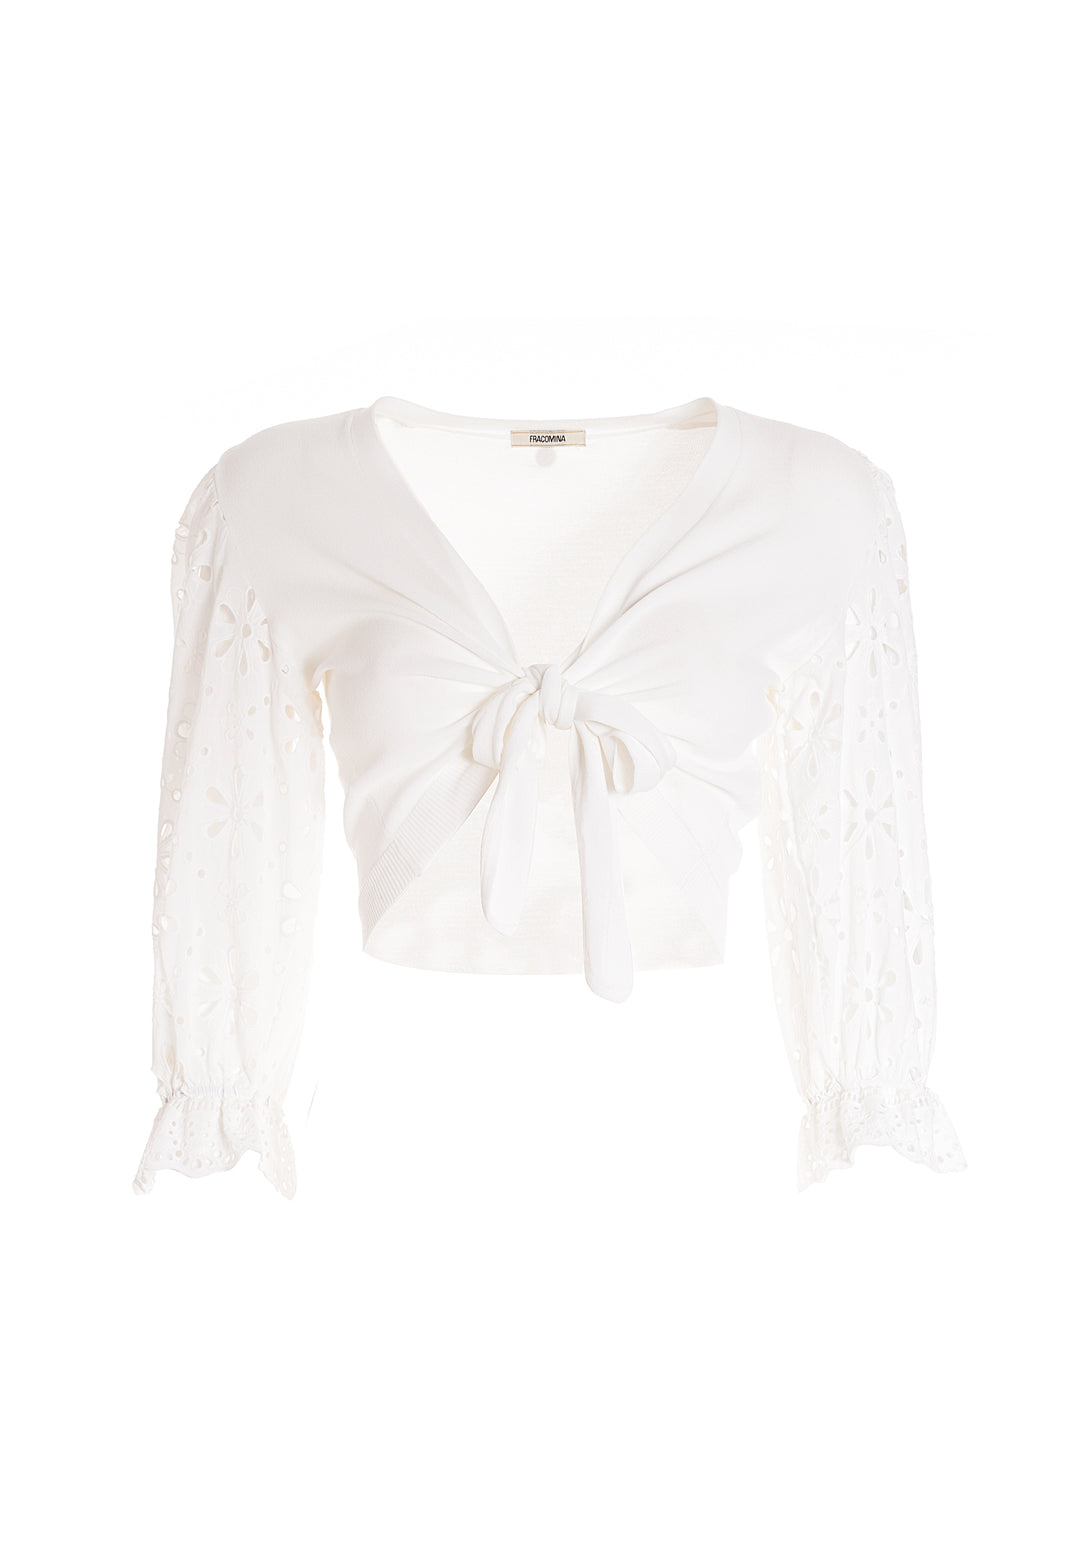 Cardigan cropped with sleeves made in San Gallo lace